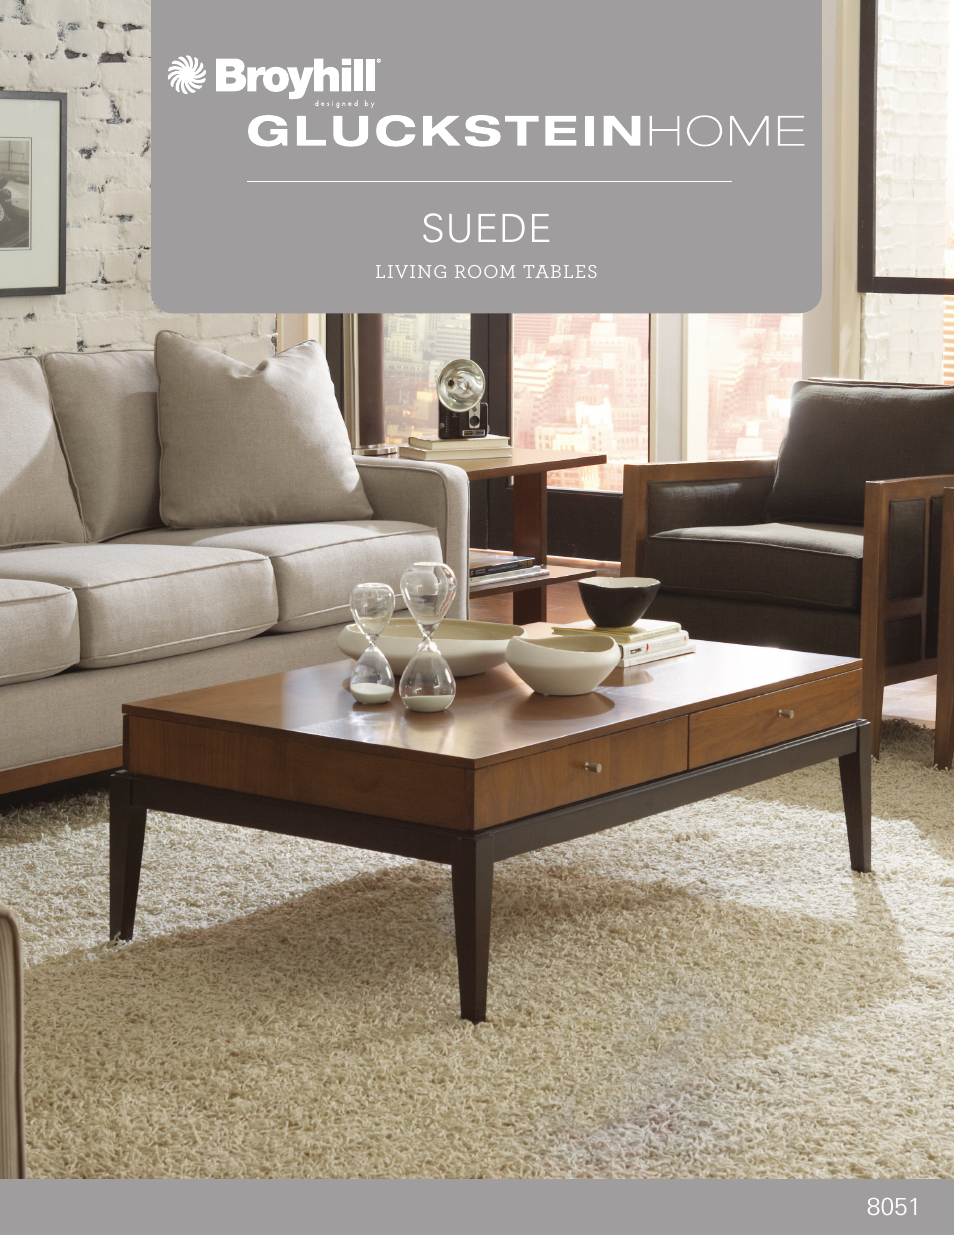 SUEDE END TABLE Product Details